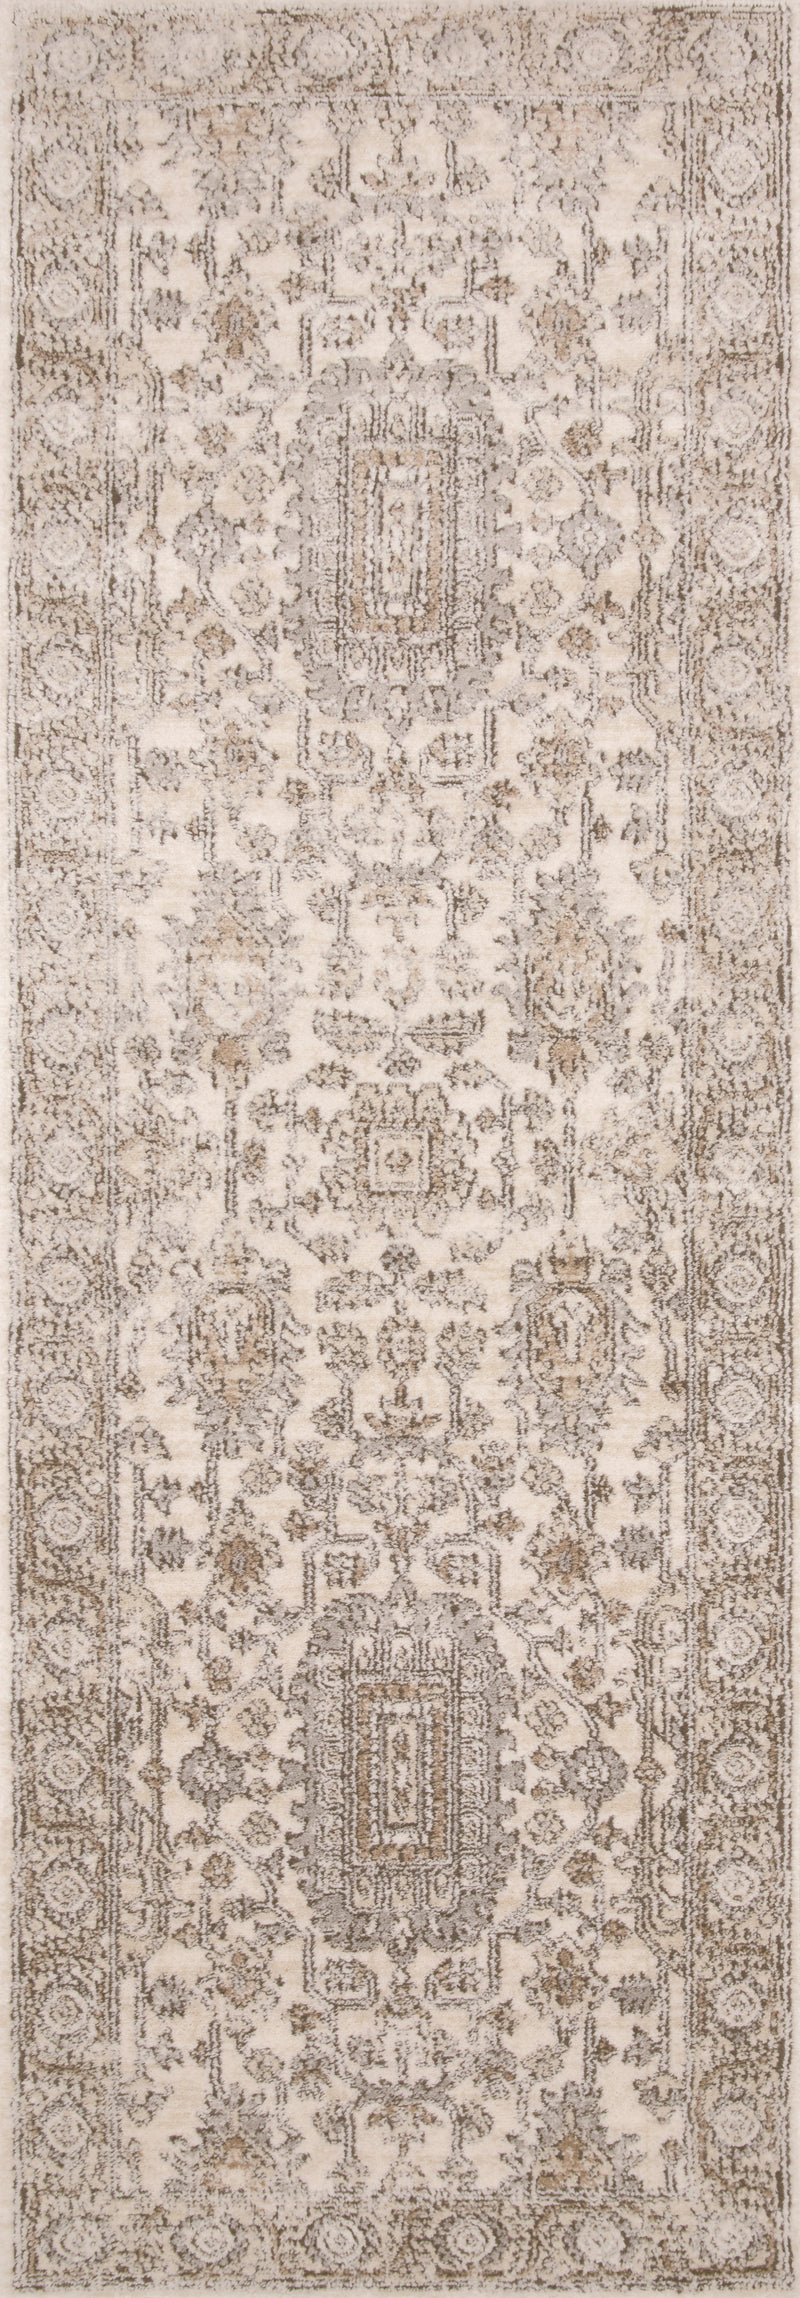 media image for Teagan Rug in Ivory / Sand by Loloi II 275